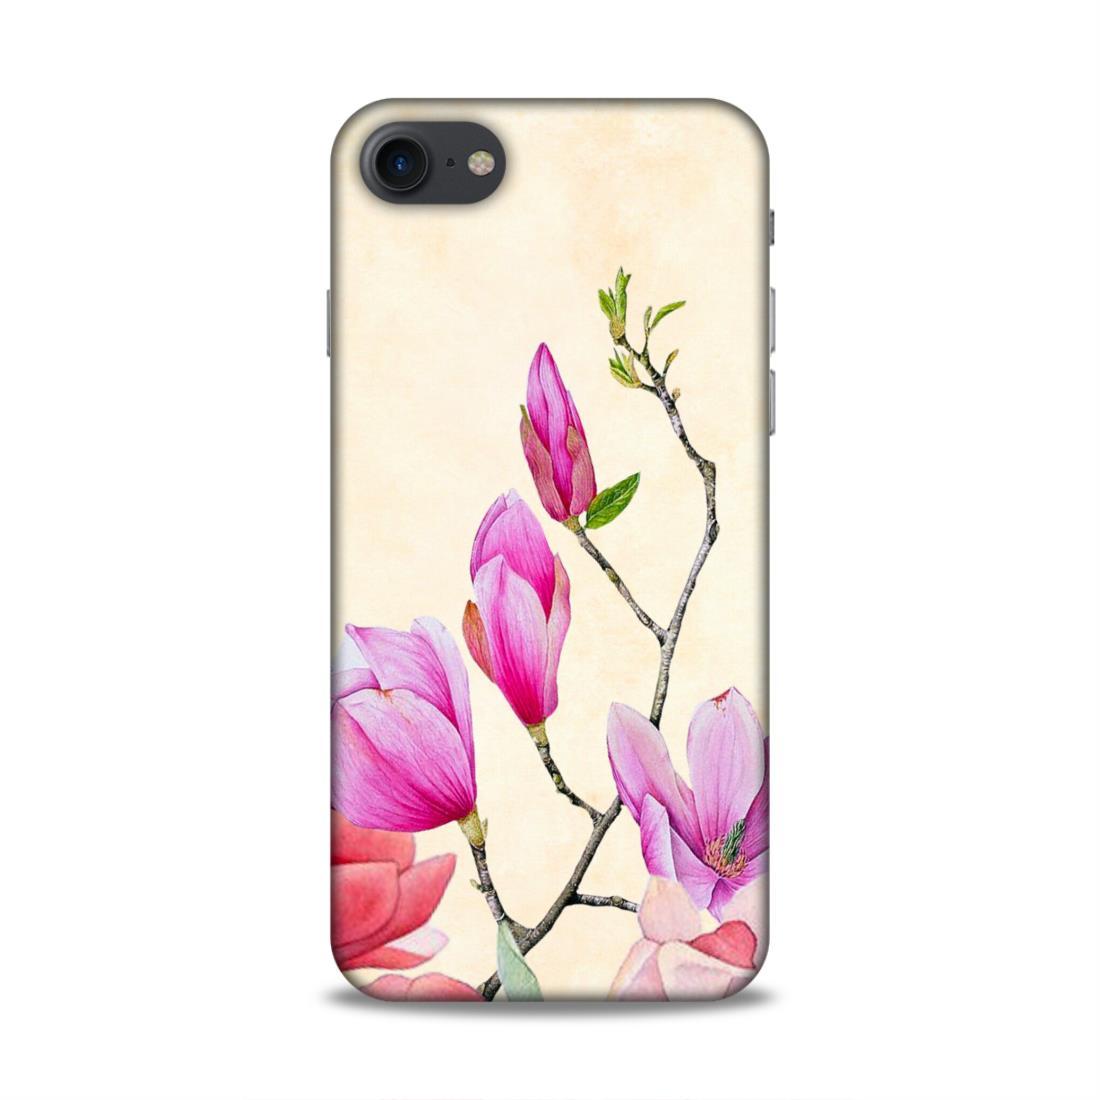 Pink Flower iPhone 7 Mobile Cover Case